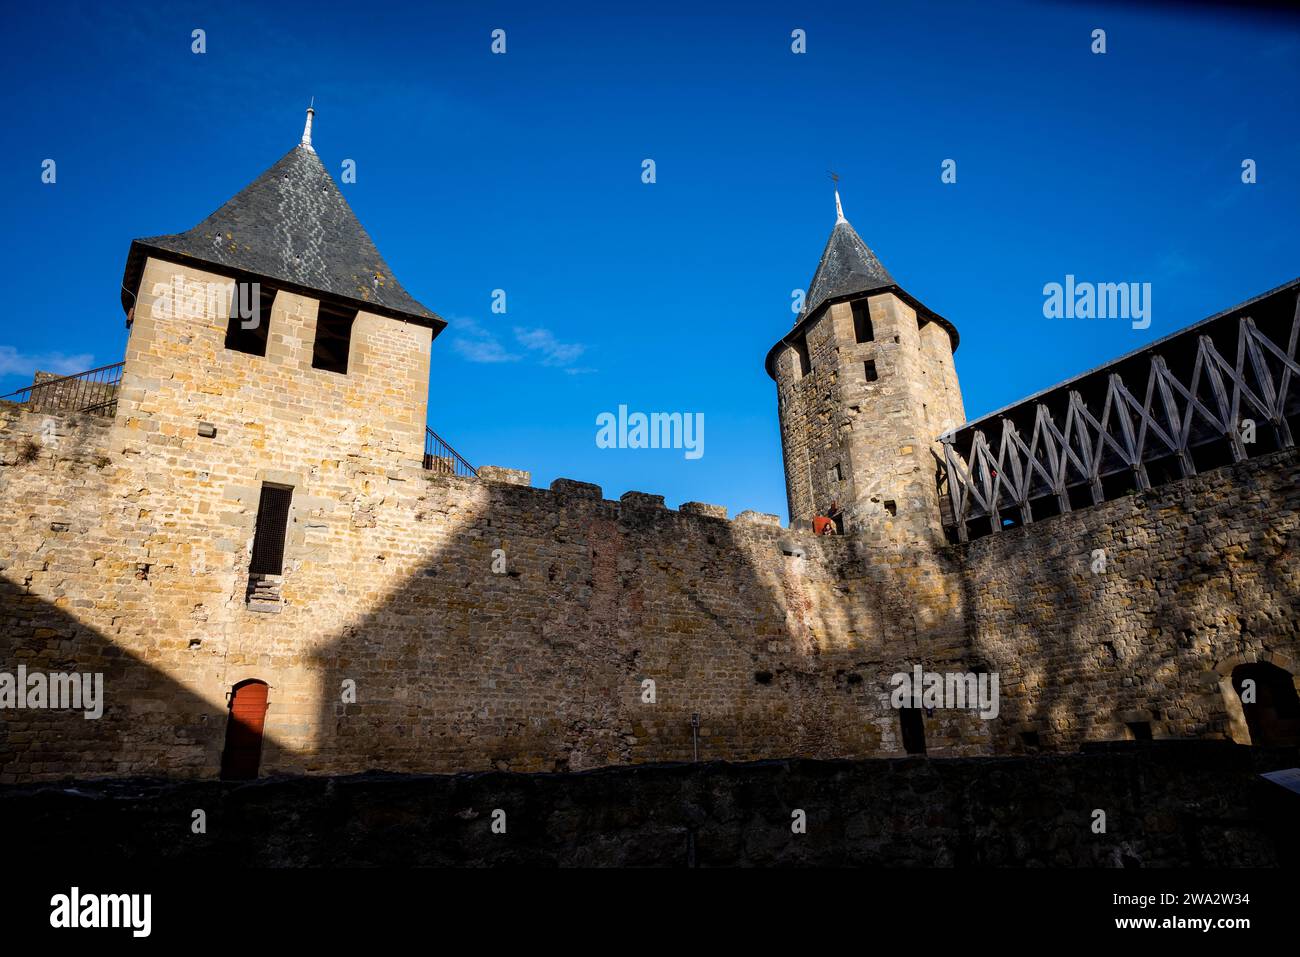 Château Comtal, Large, restored 12th-century hilltop castle, with a museum in this renowned, medieval walled city, La Cité, medieval citadel, Carcasso Stock Photo